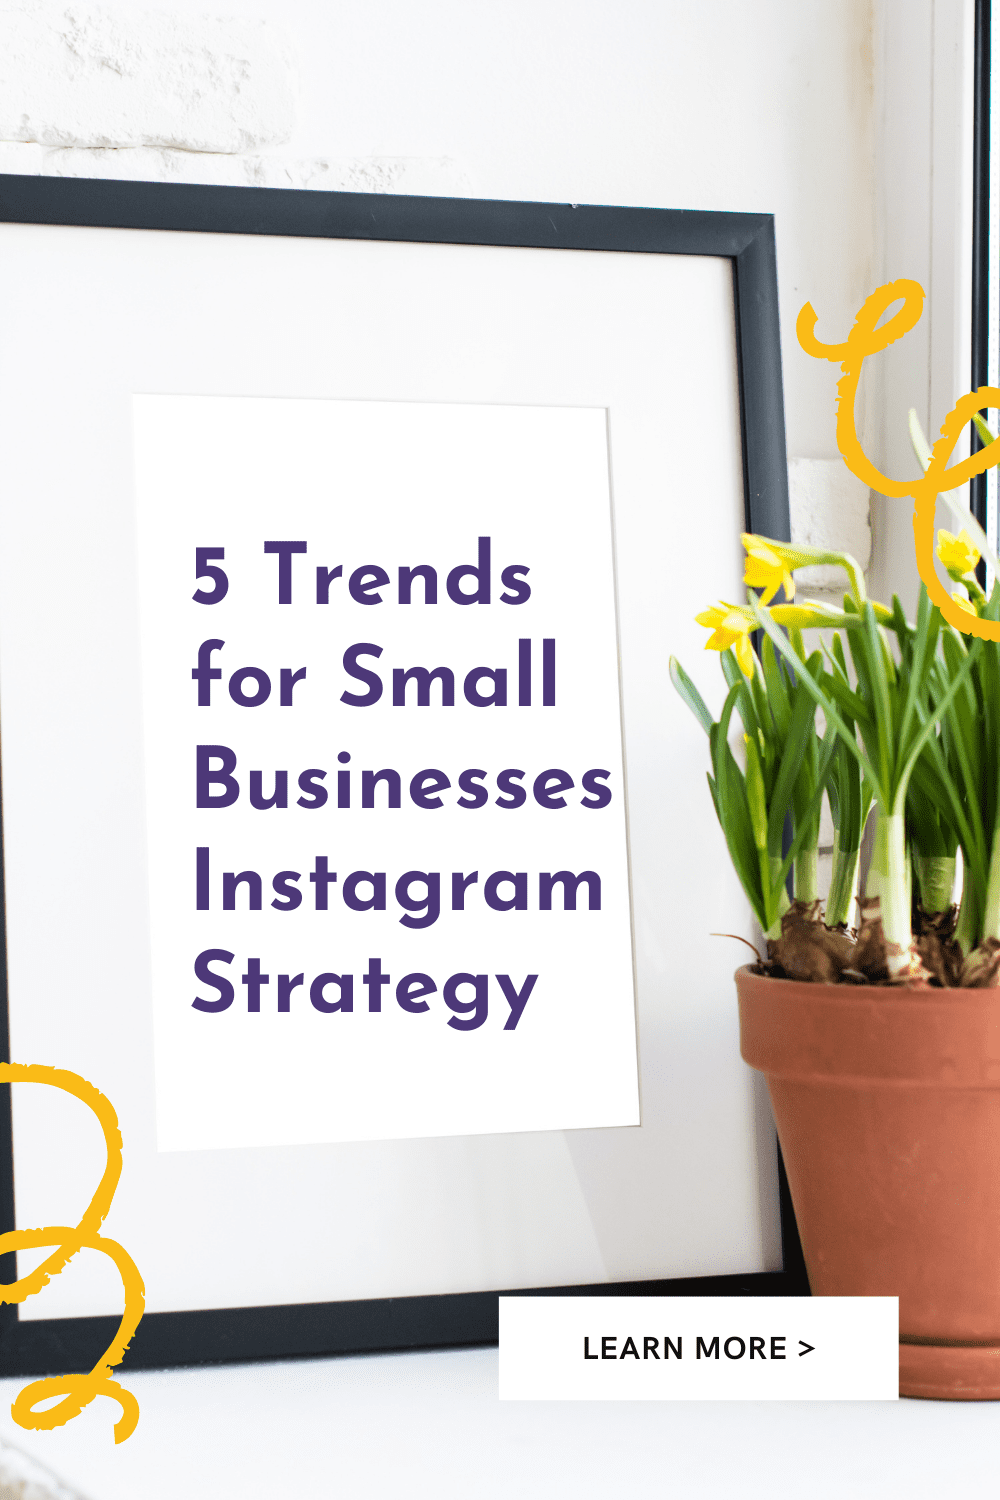 5 trends for small businesses Instagram Strategy